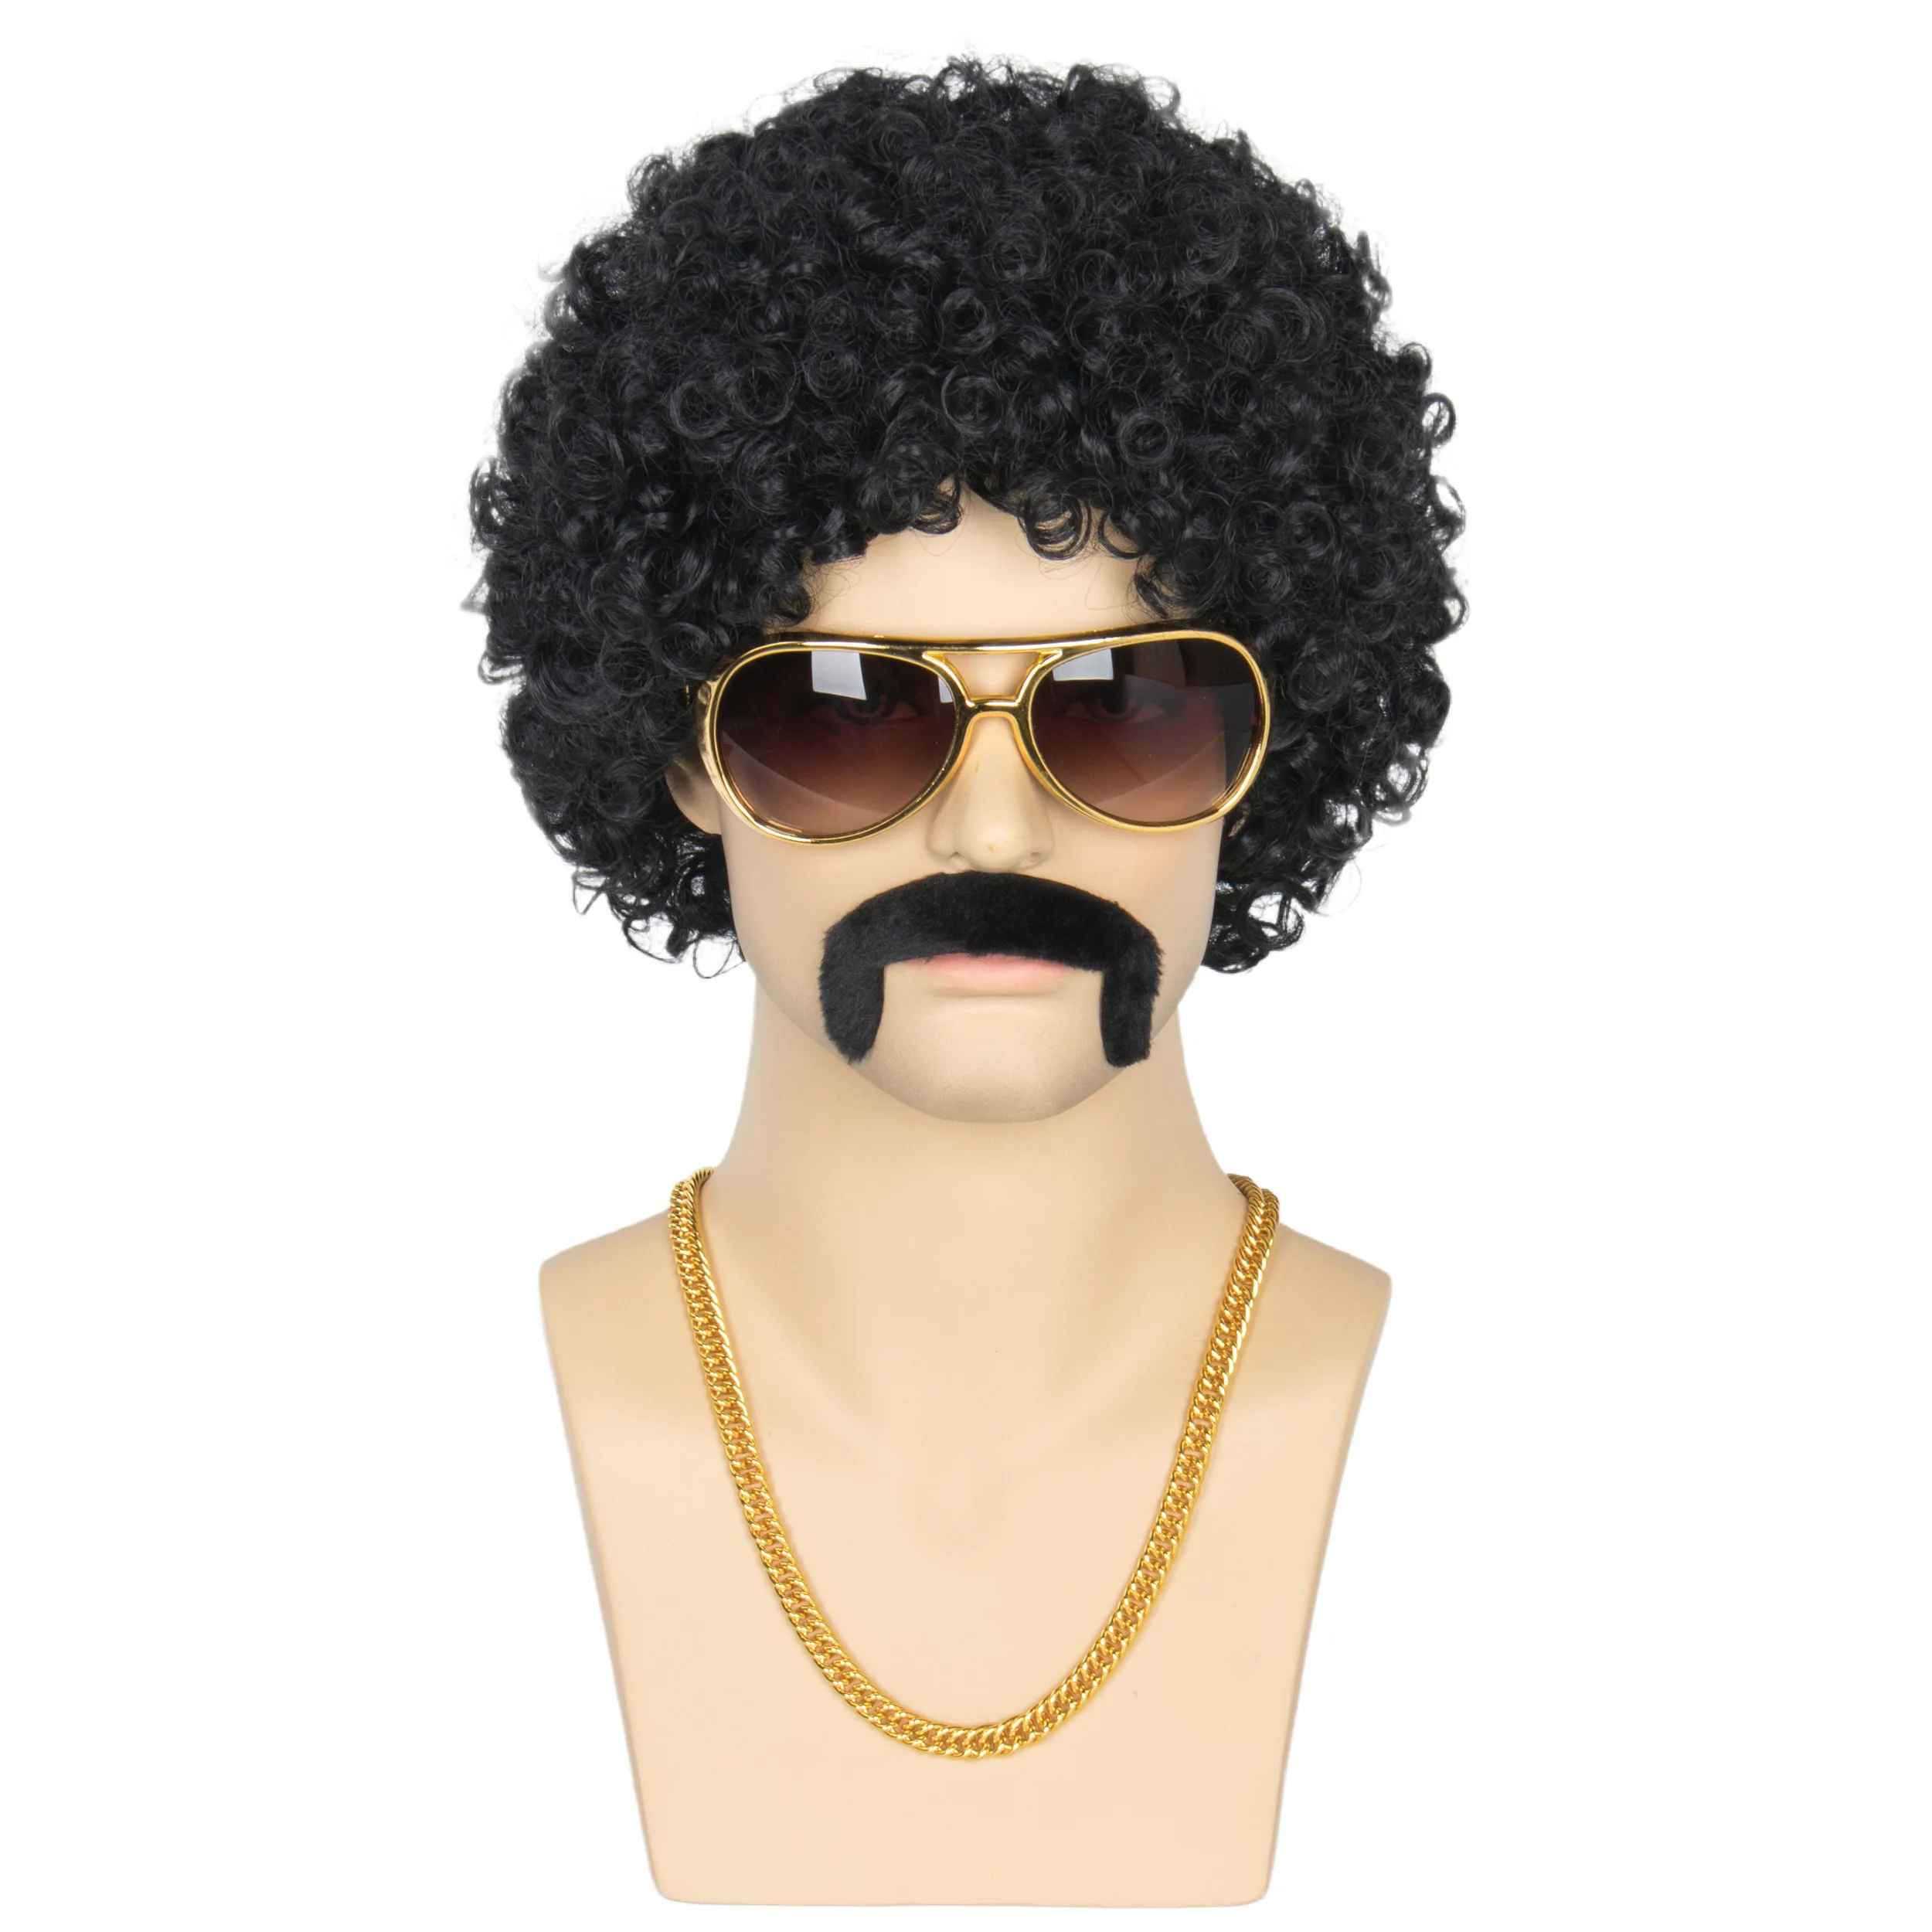 

Miss U Hair Afro Wig Men 70s Wig Halloween Disco Wig Short Black Curly Afro Party Wigs with Necklace Glasses Mustache